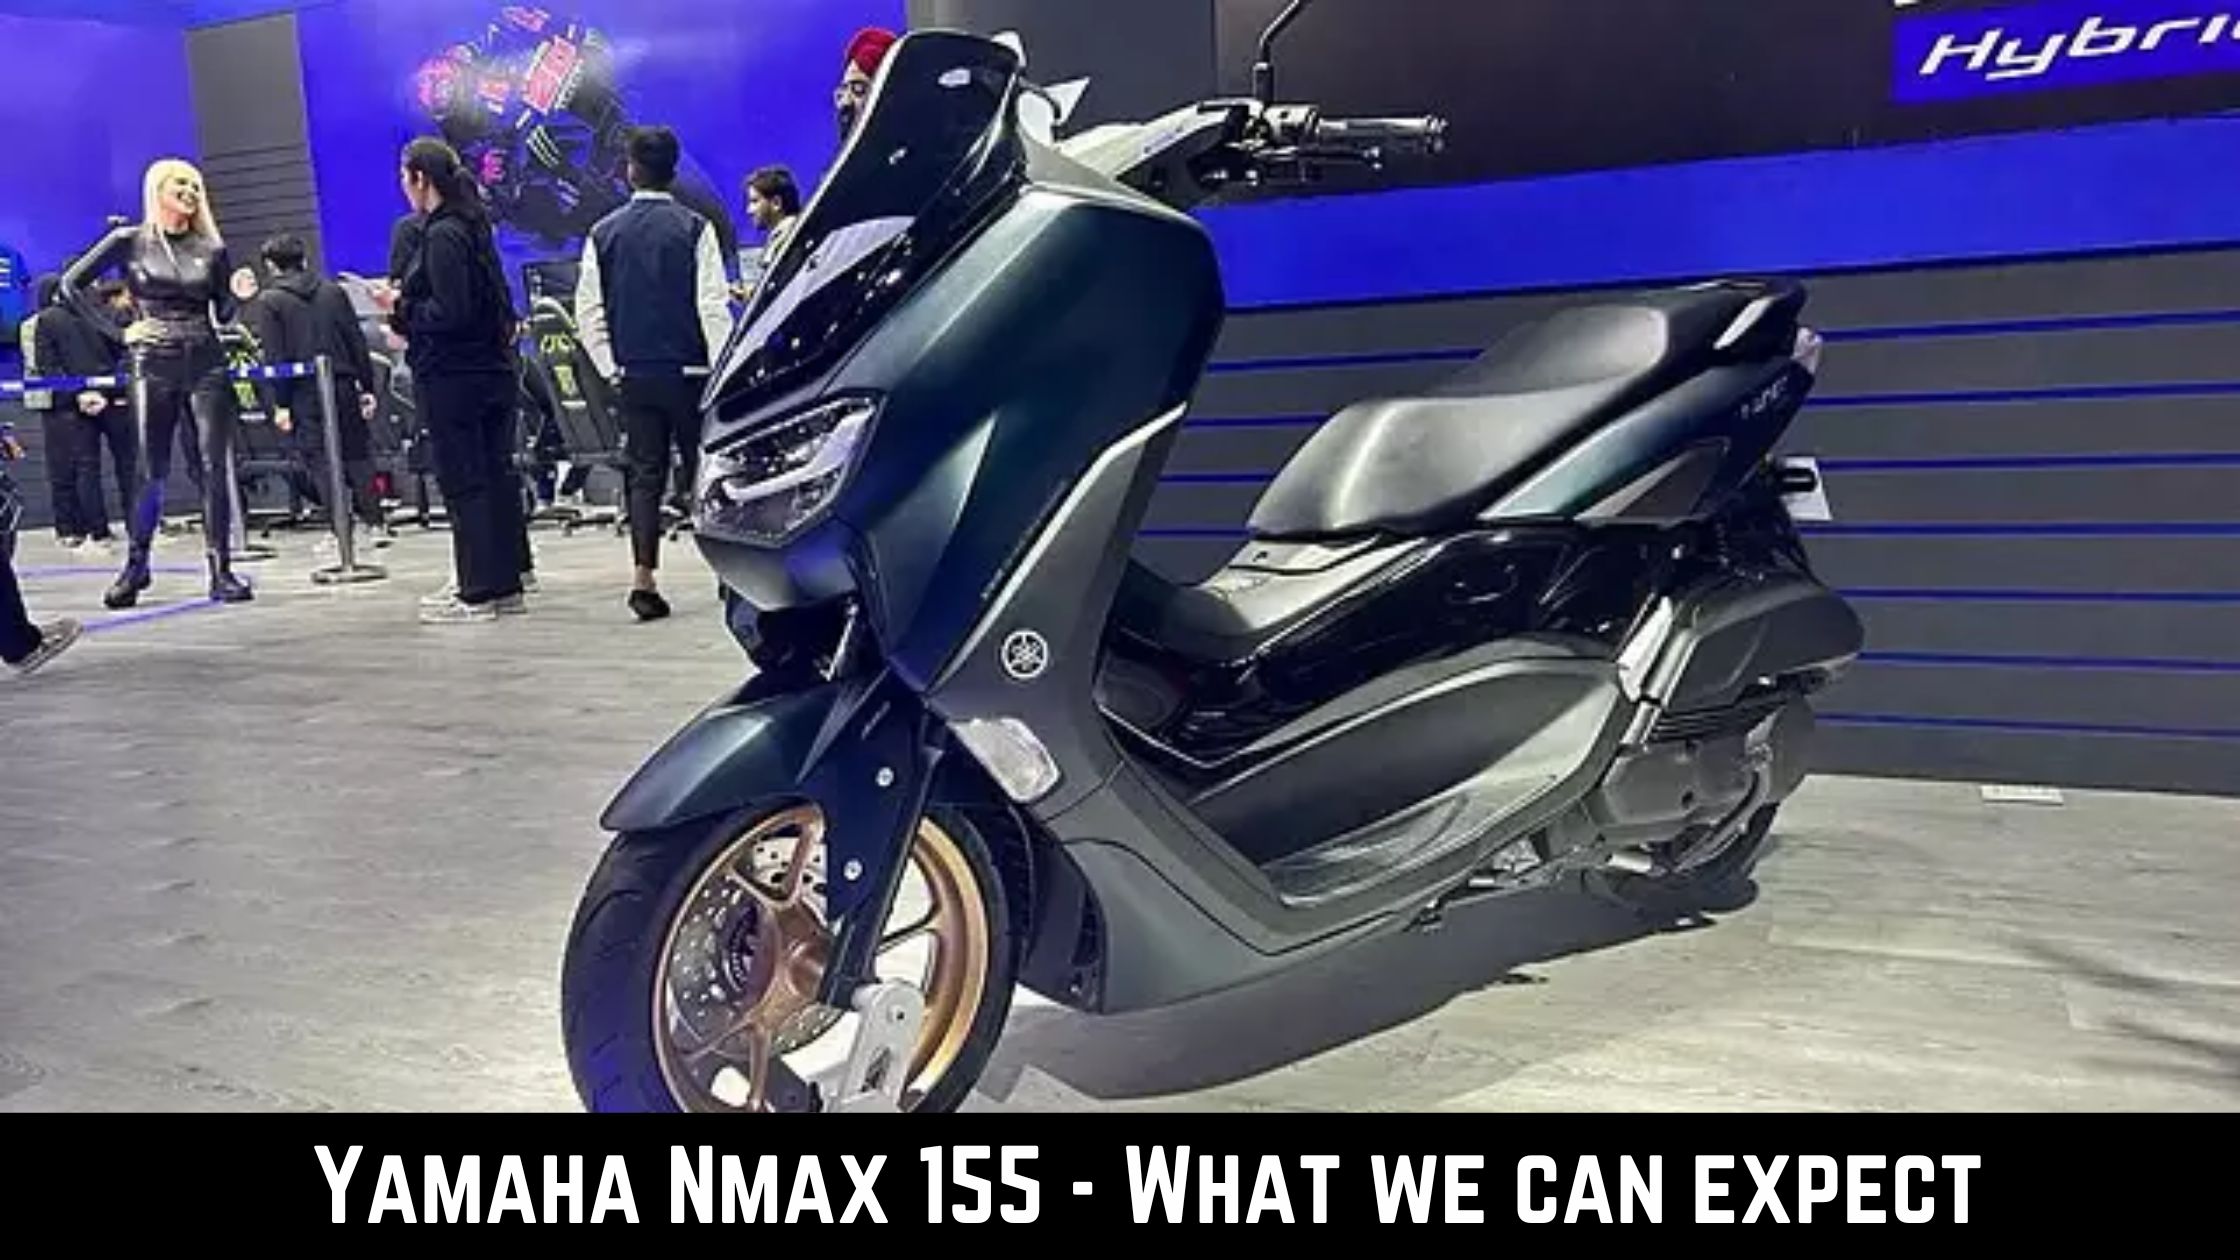 Yamaha Nmax 155 - What we can expect